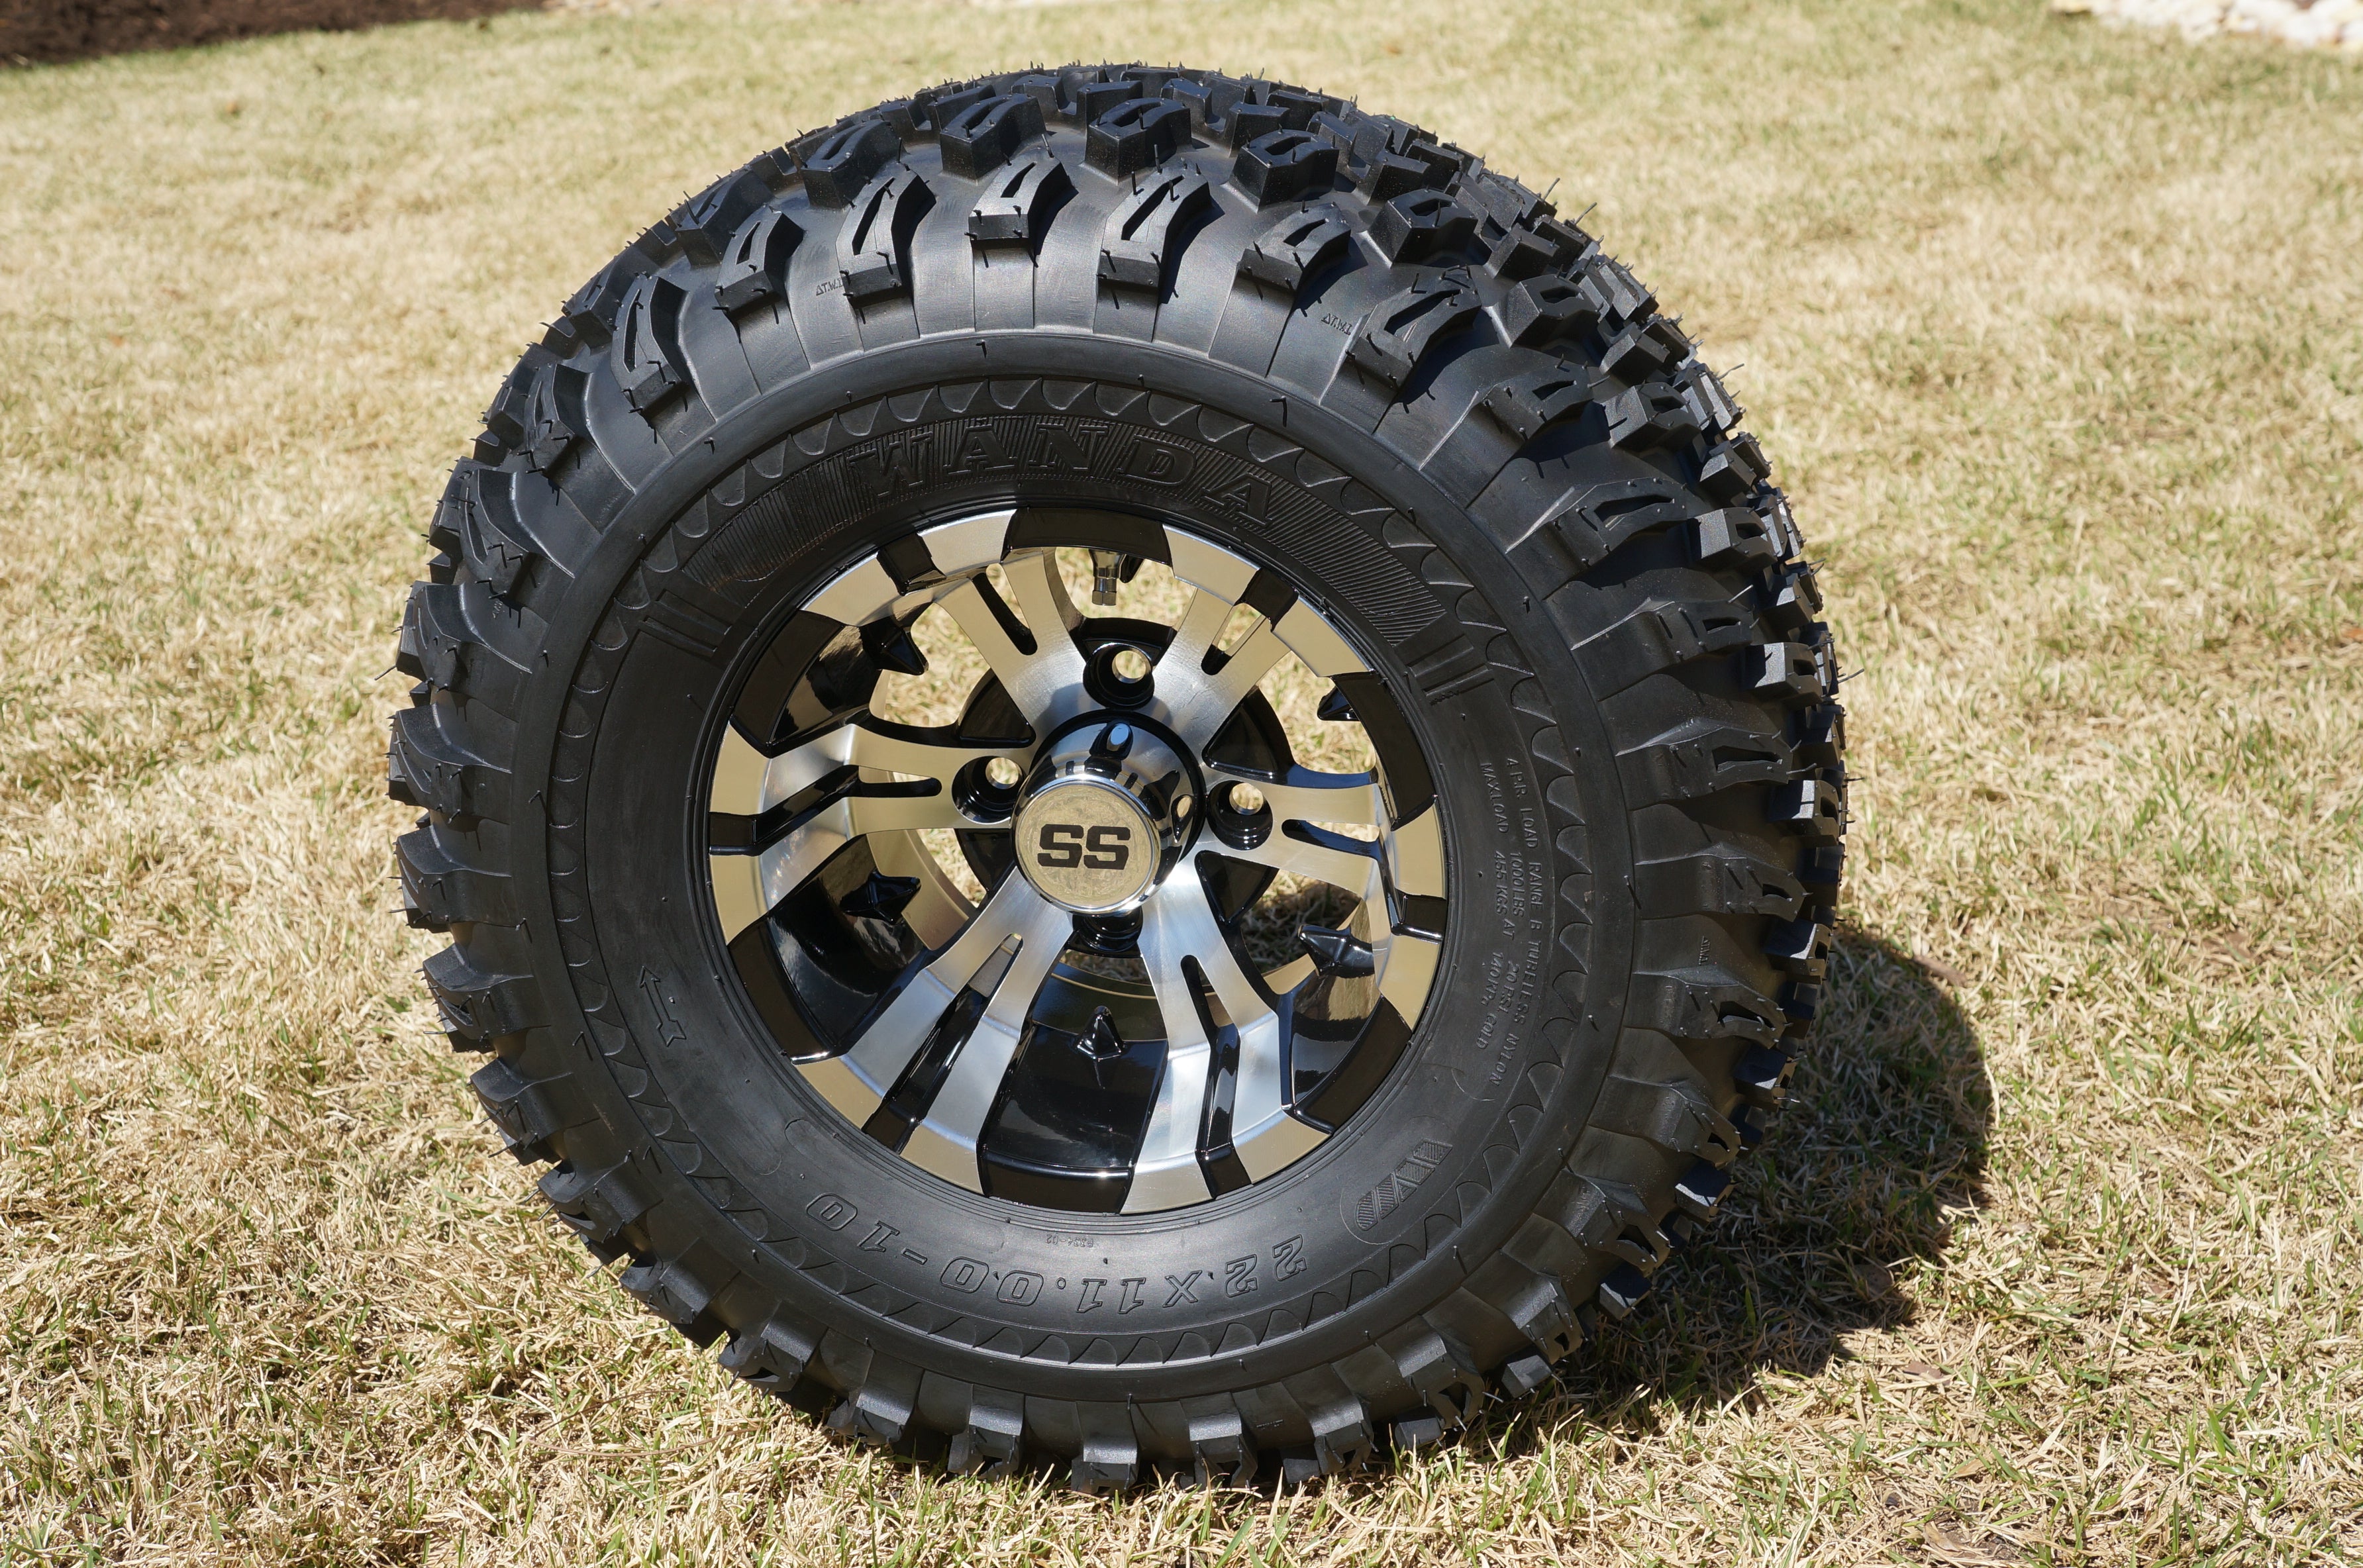 10" Vampire Machined Black Wheel Aluminum Alloy 22"x11"-10" All Terrain Tire DOT Approved WH1022-TR1005